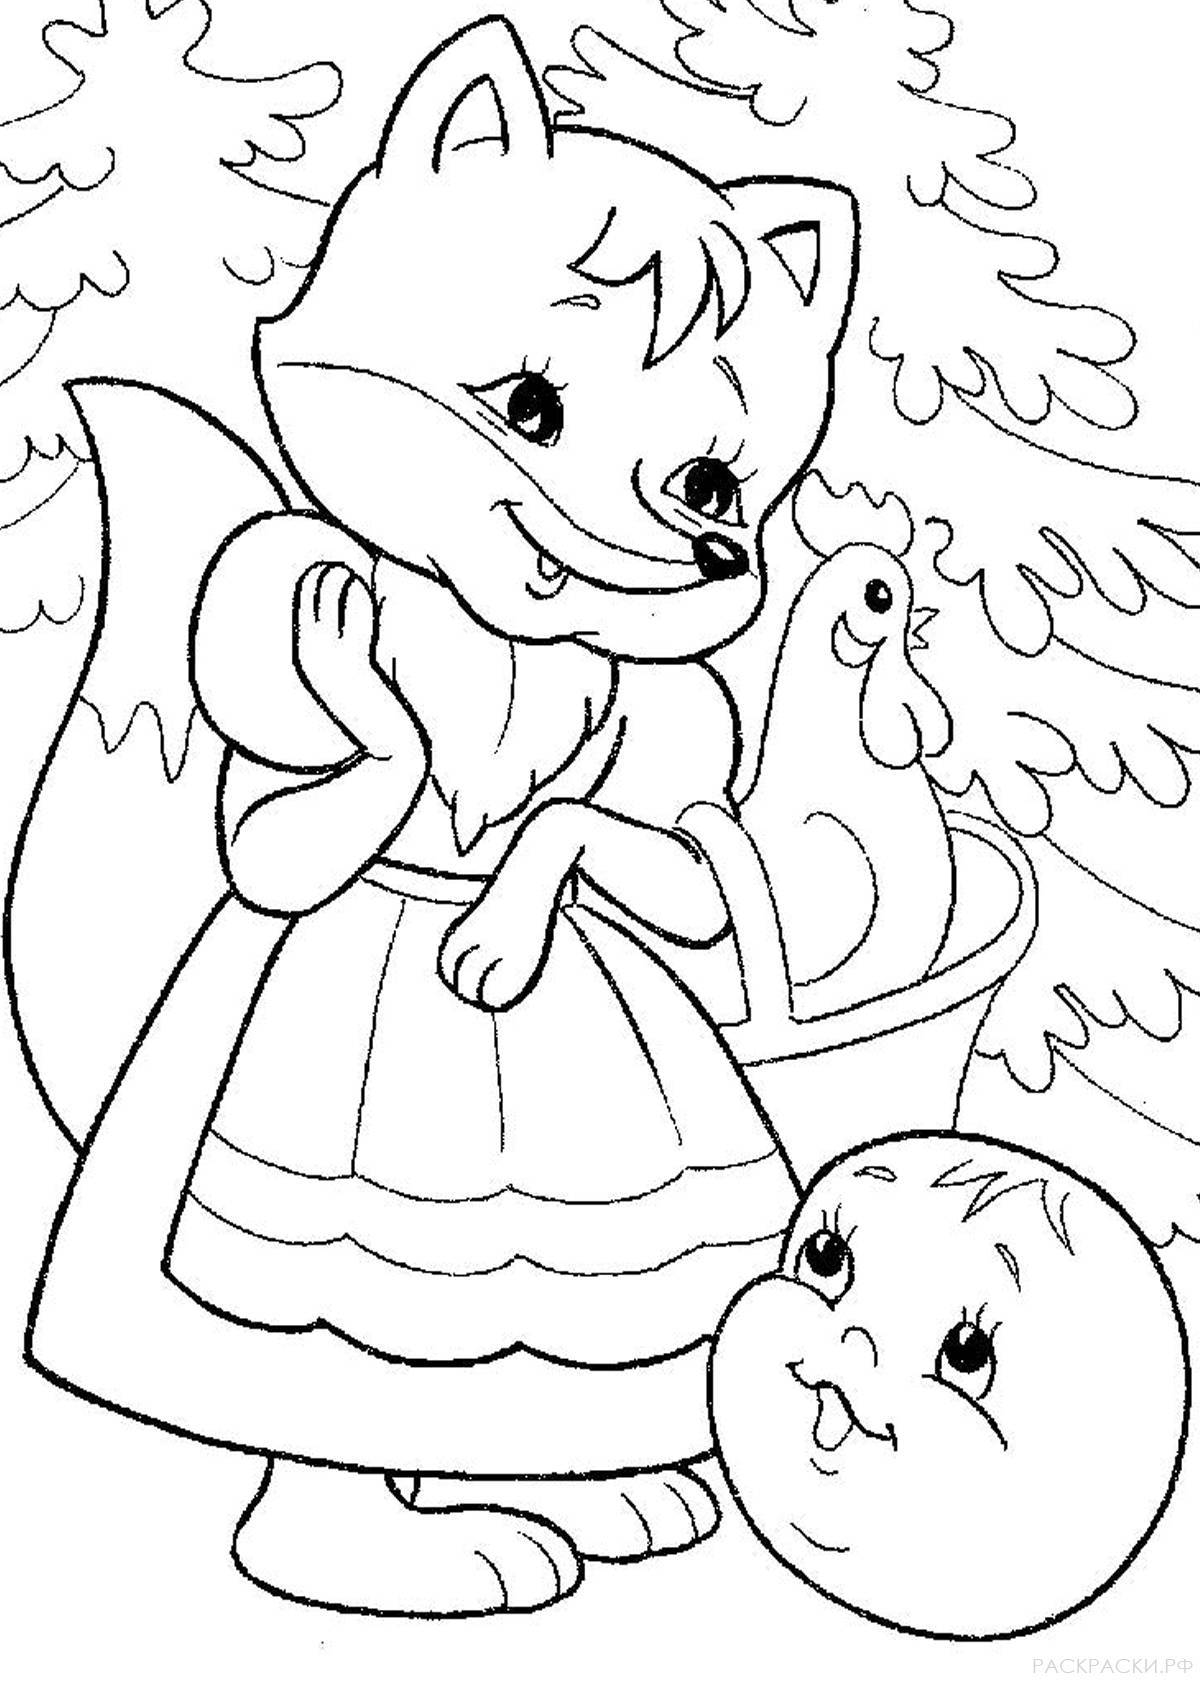 Adorable coloring book based on fairy tales